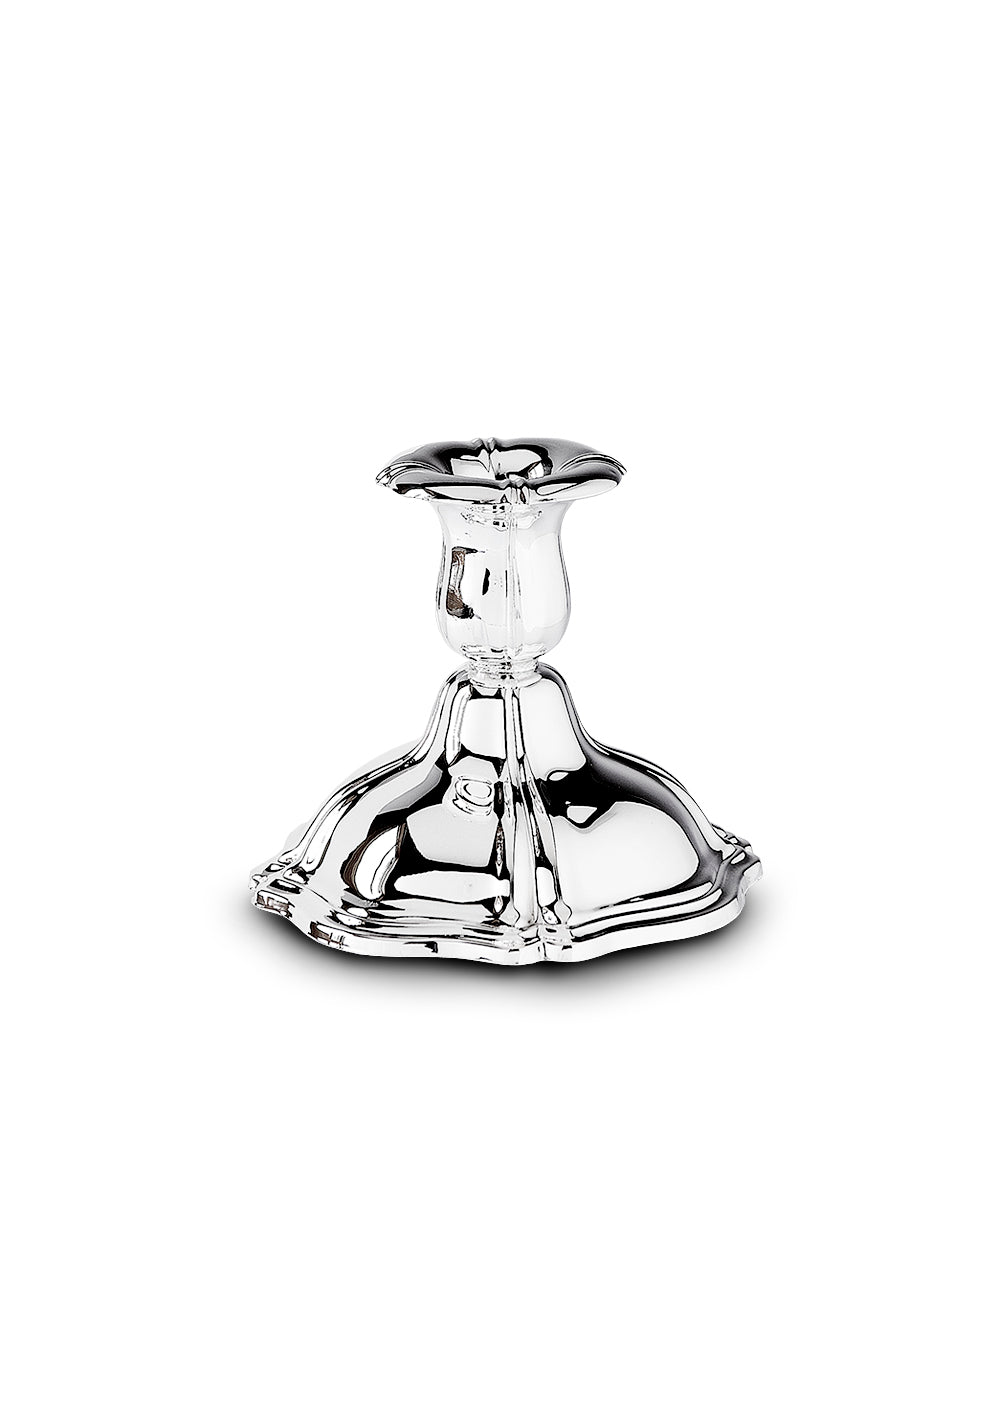 Candlestick in silver